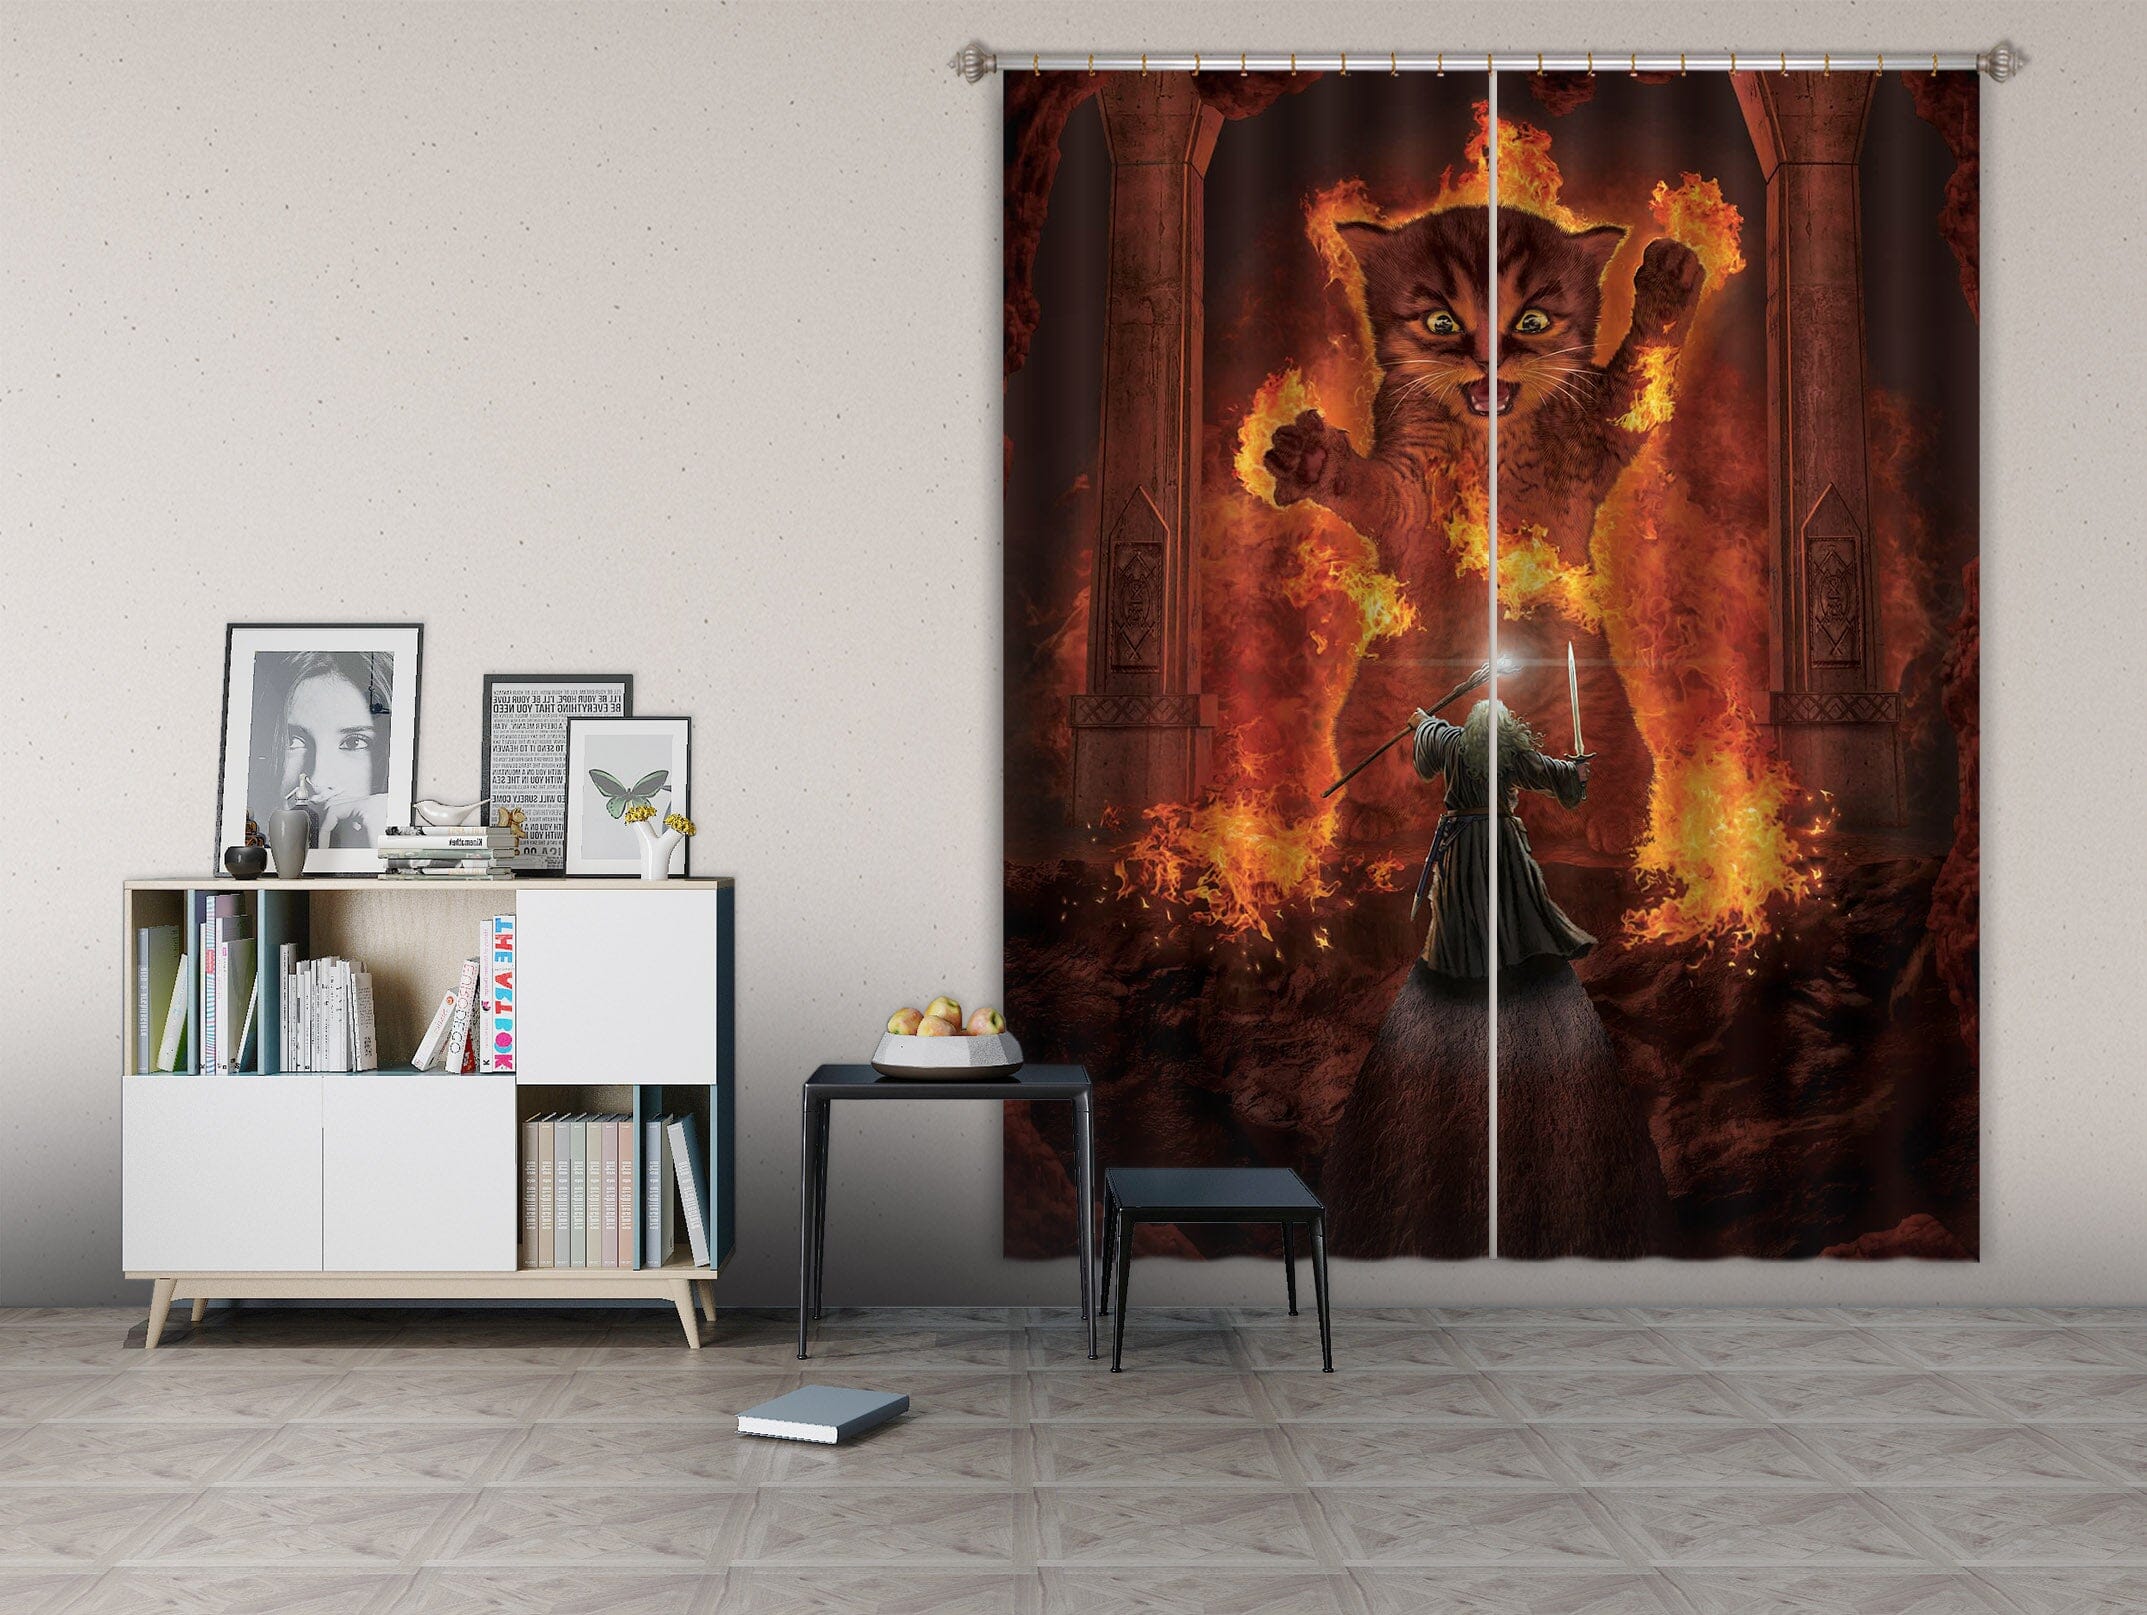 3D You Shall Not Pass 097 Vincent Hie Curtain Curtains Drapes Curtains AJ Creativity Home 